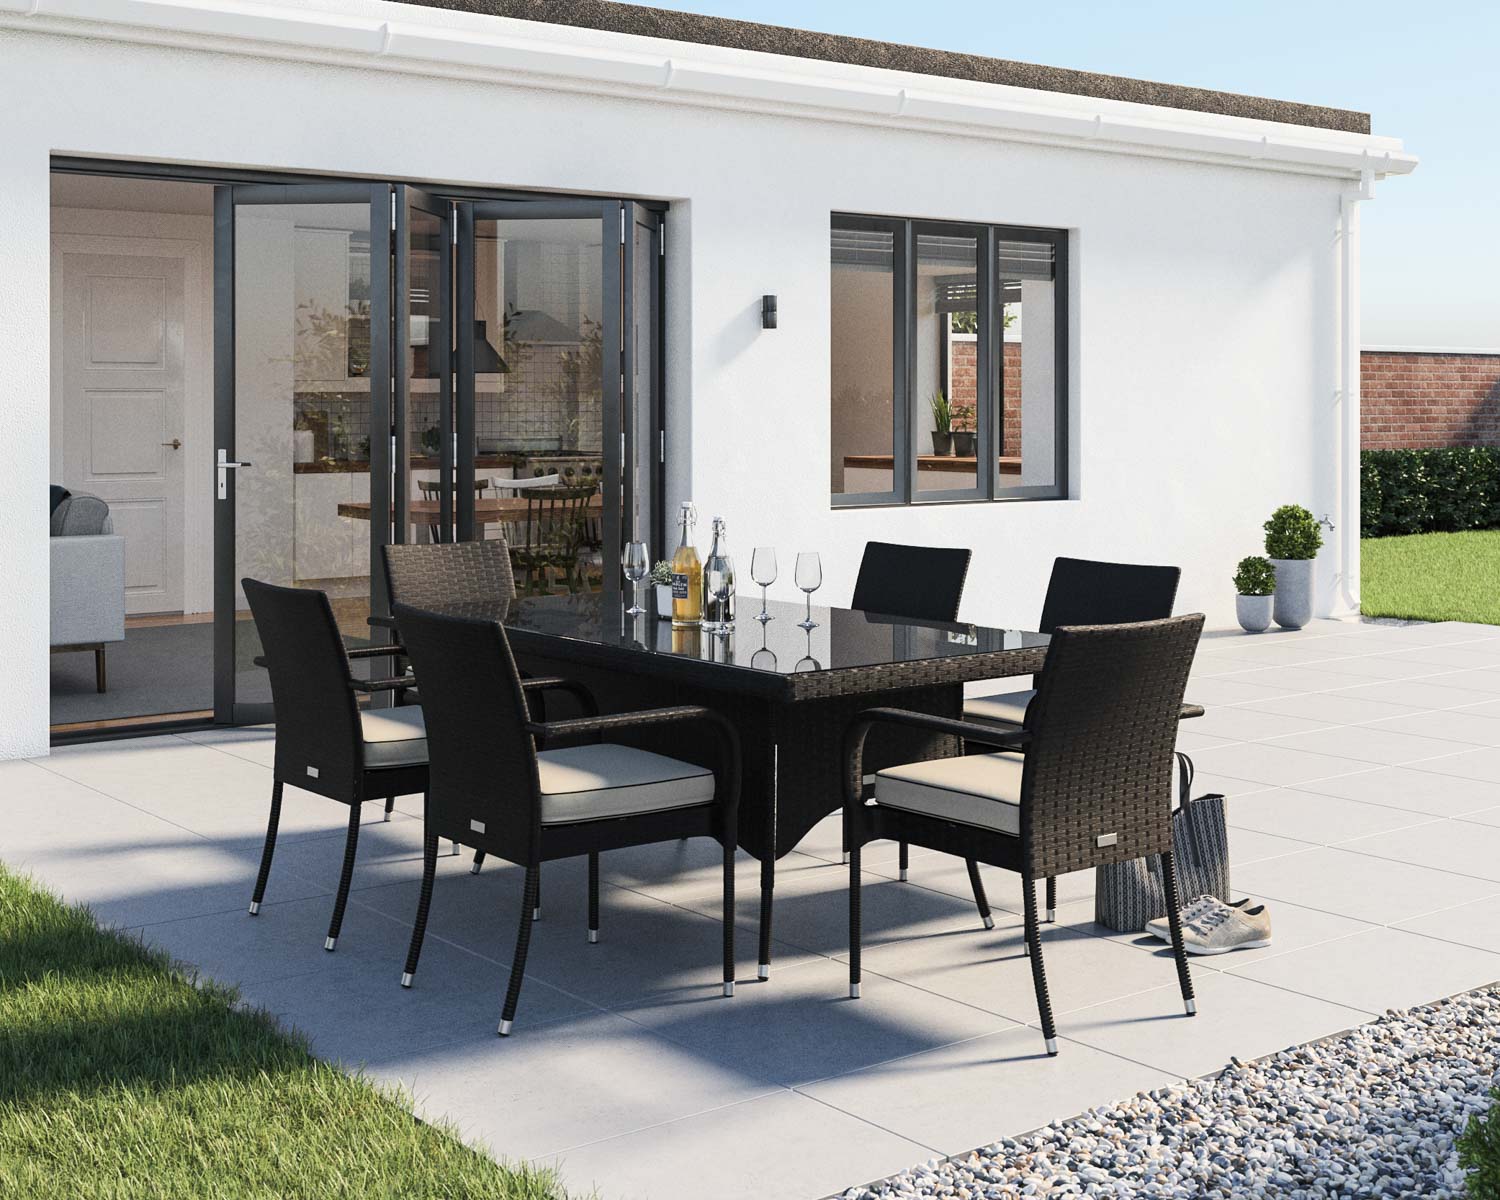 6 Seat Rattan Garden Dining Set With Rectangular Dining Table in Black